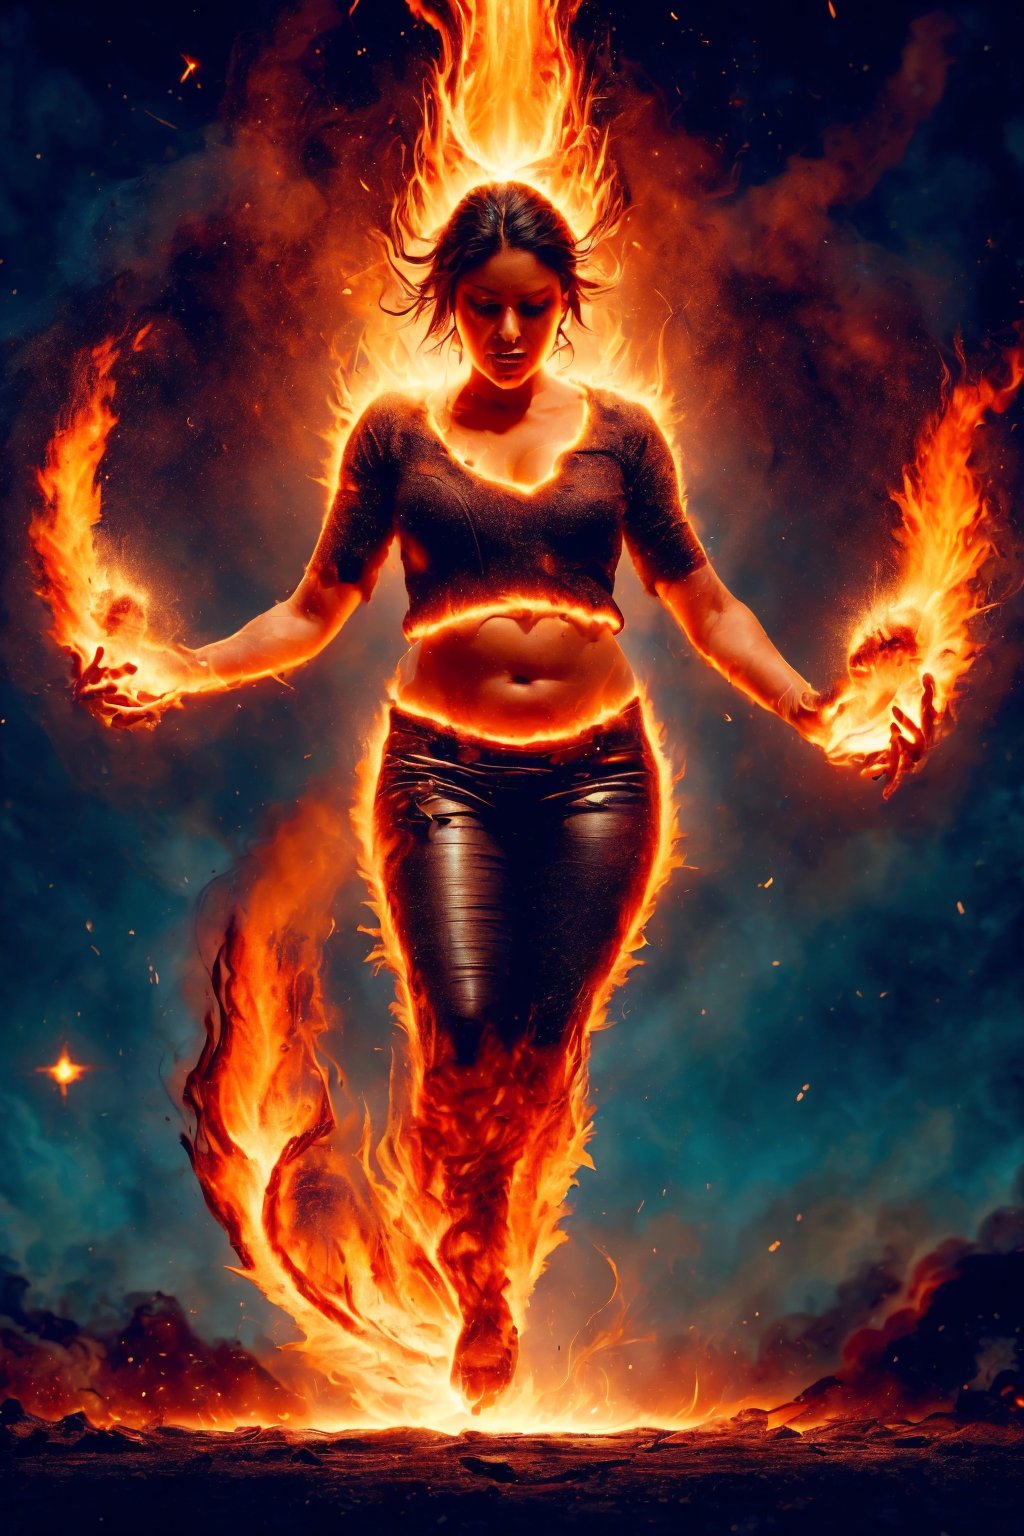 Full body on flame, lava skin, magic thunder,,glowing forehead, big navel, 30year old women body, ,fireastrologystylecontrol over fire in a mesmerizing display of power, depicted through a digital illustration inspired by the dynamic energy of Alex Andreev's artwork.